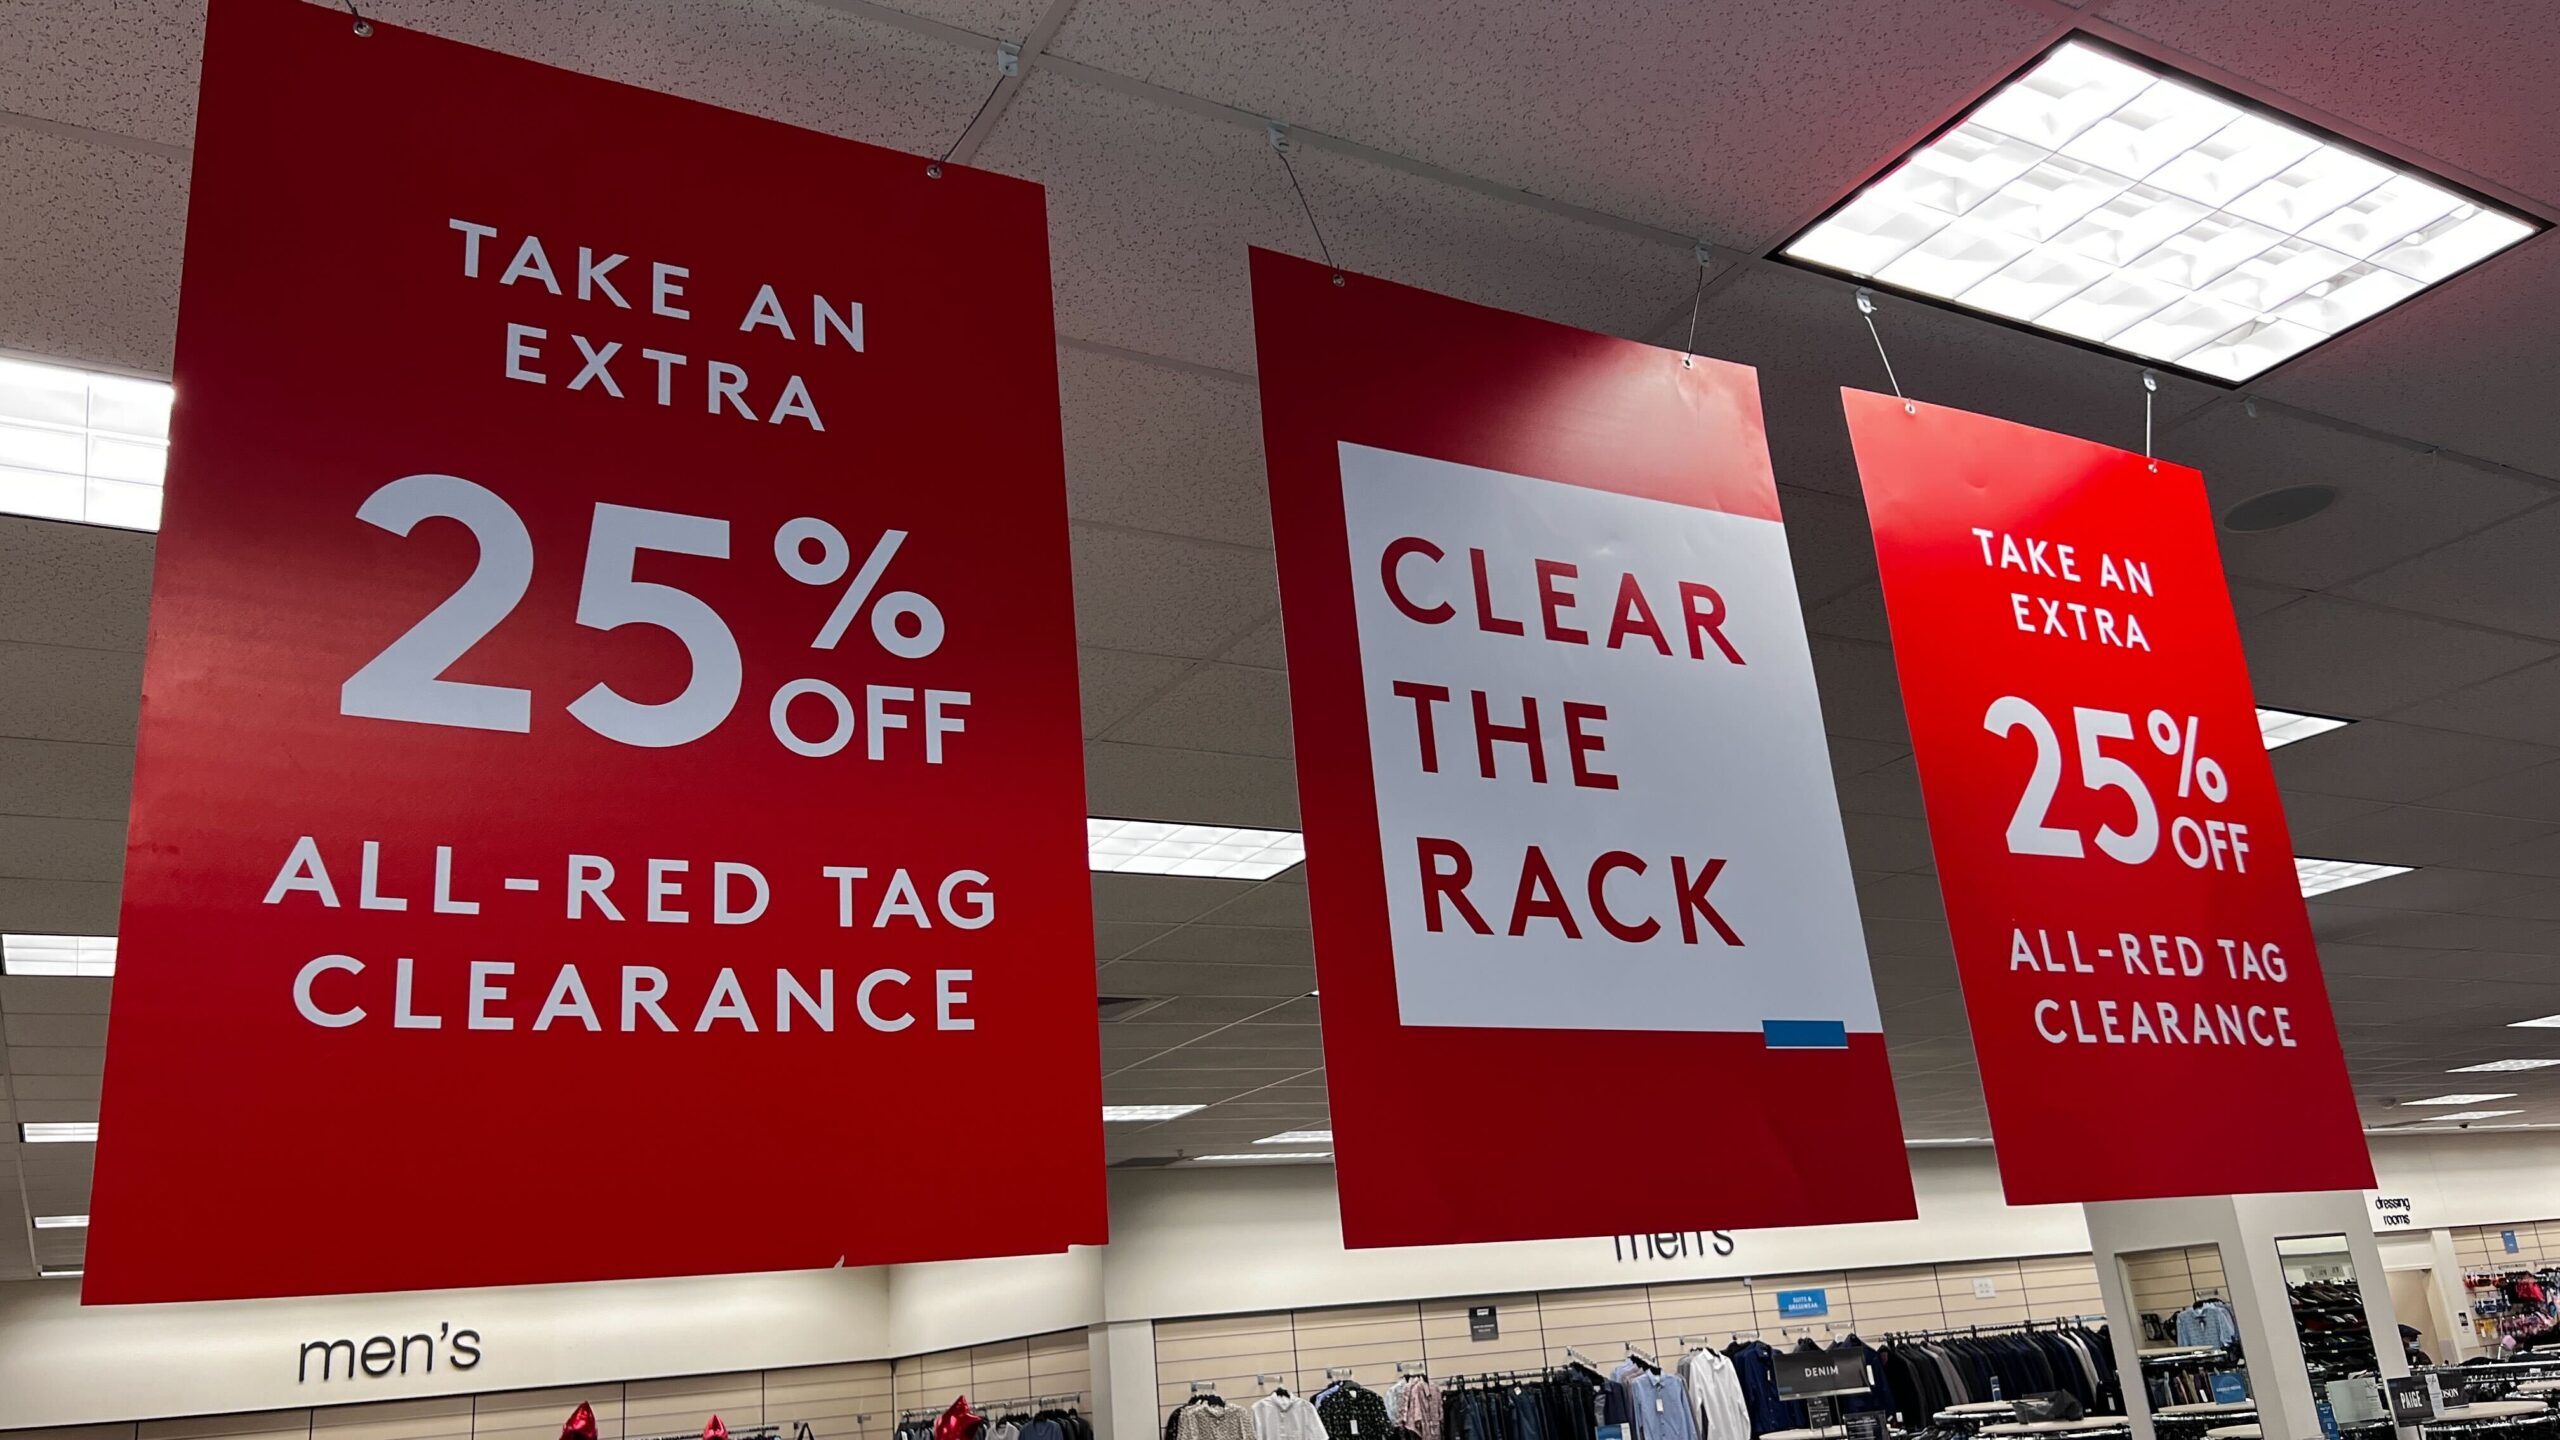 Nordstrom Rack Clear the Rack Sale EXTRA 25 OFF Red Tag Clearance